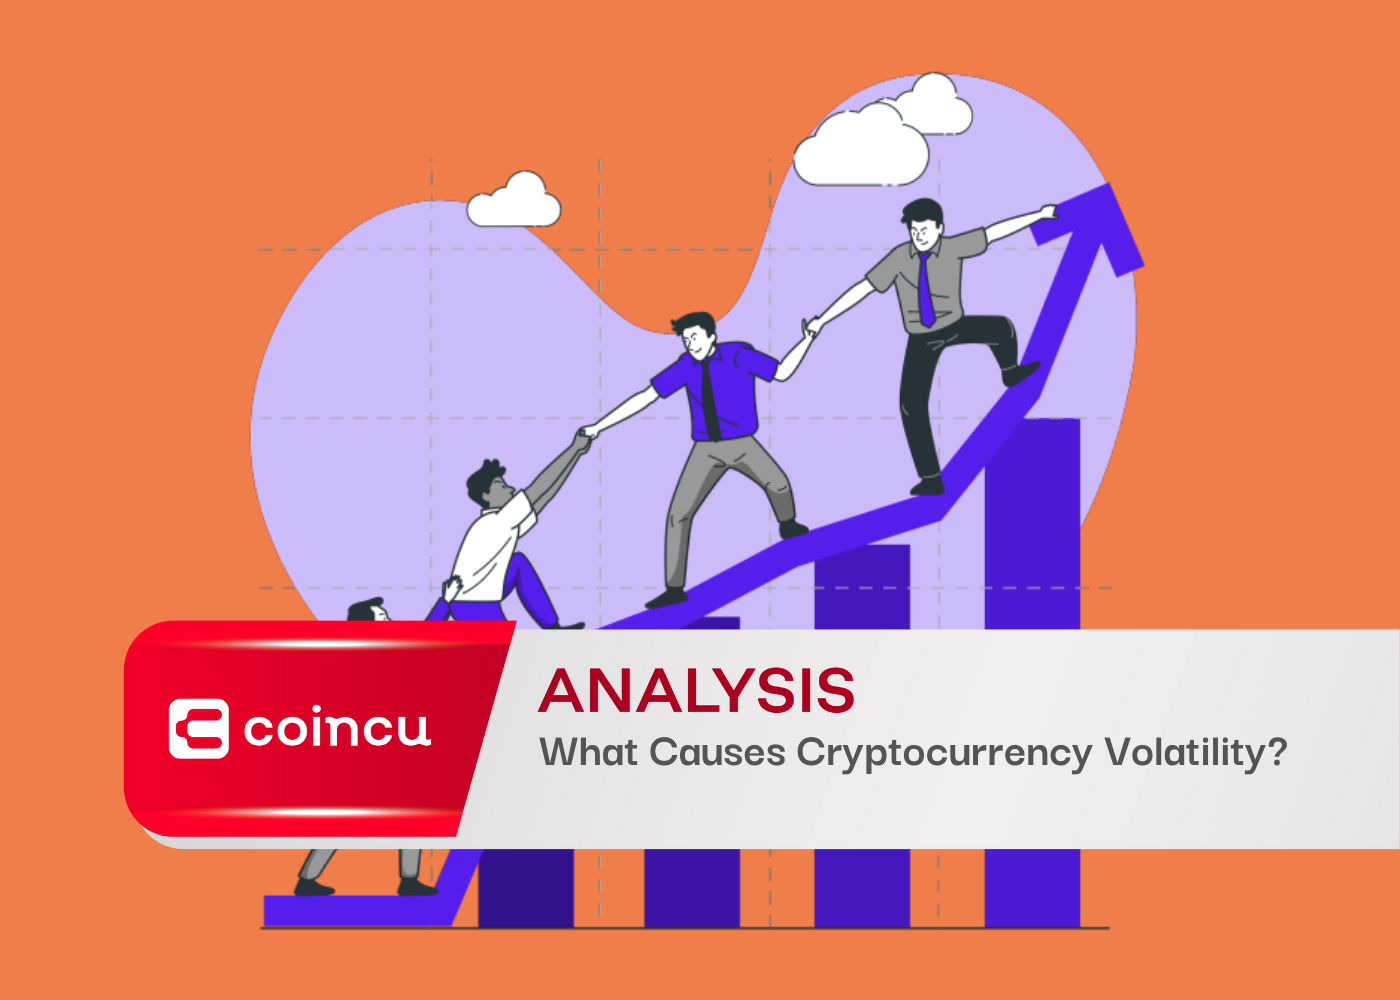 What Causes Cryptocurrency Volatility?